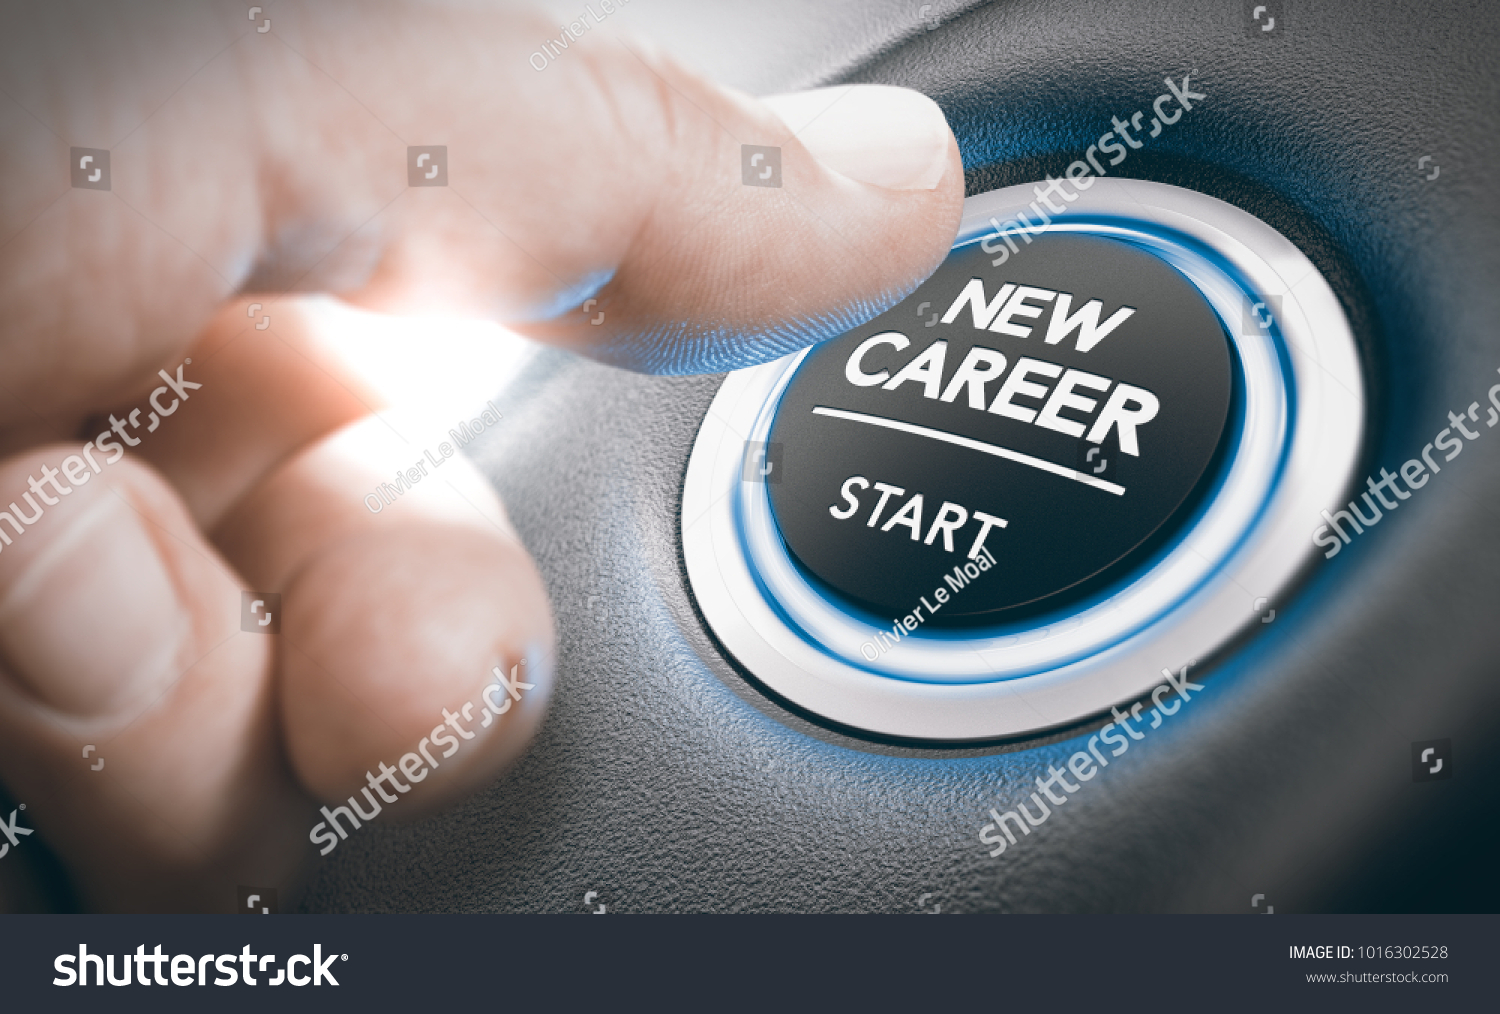 Finger pressing a new career start button. Concept of occupational or professional retraining or job opportunities. Composite between a hand photography and a 3D background #1016302528